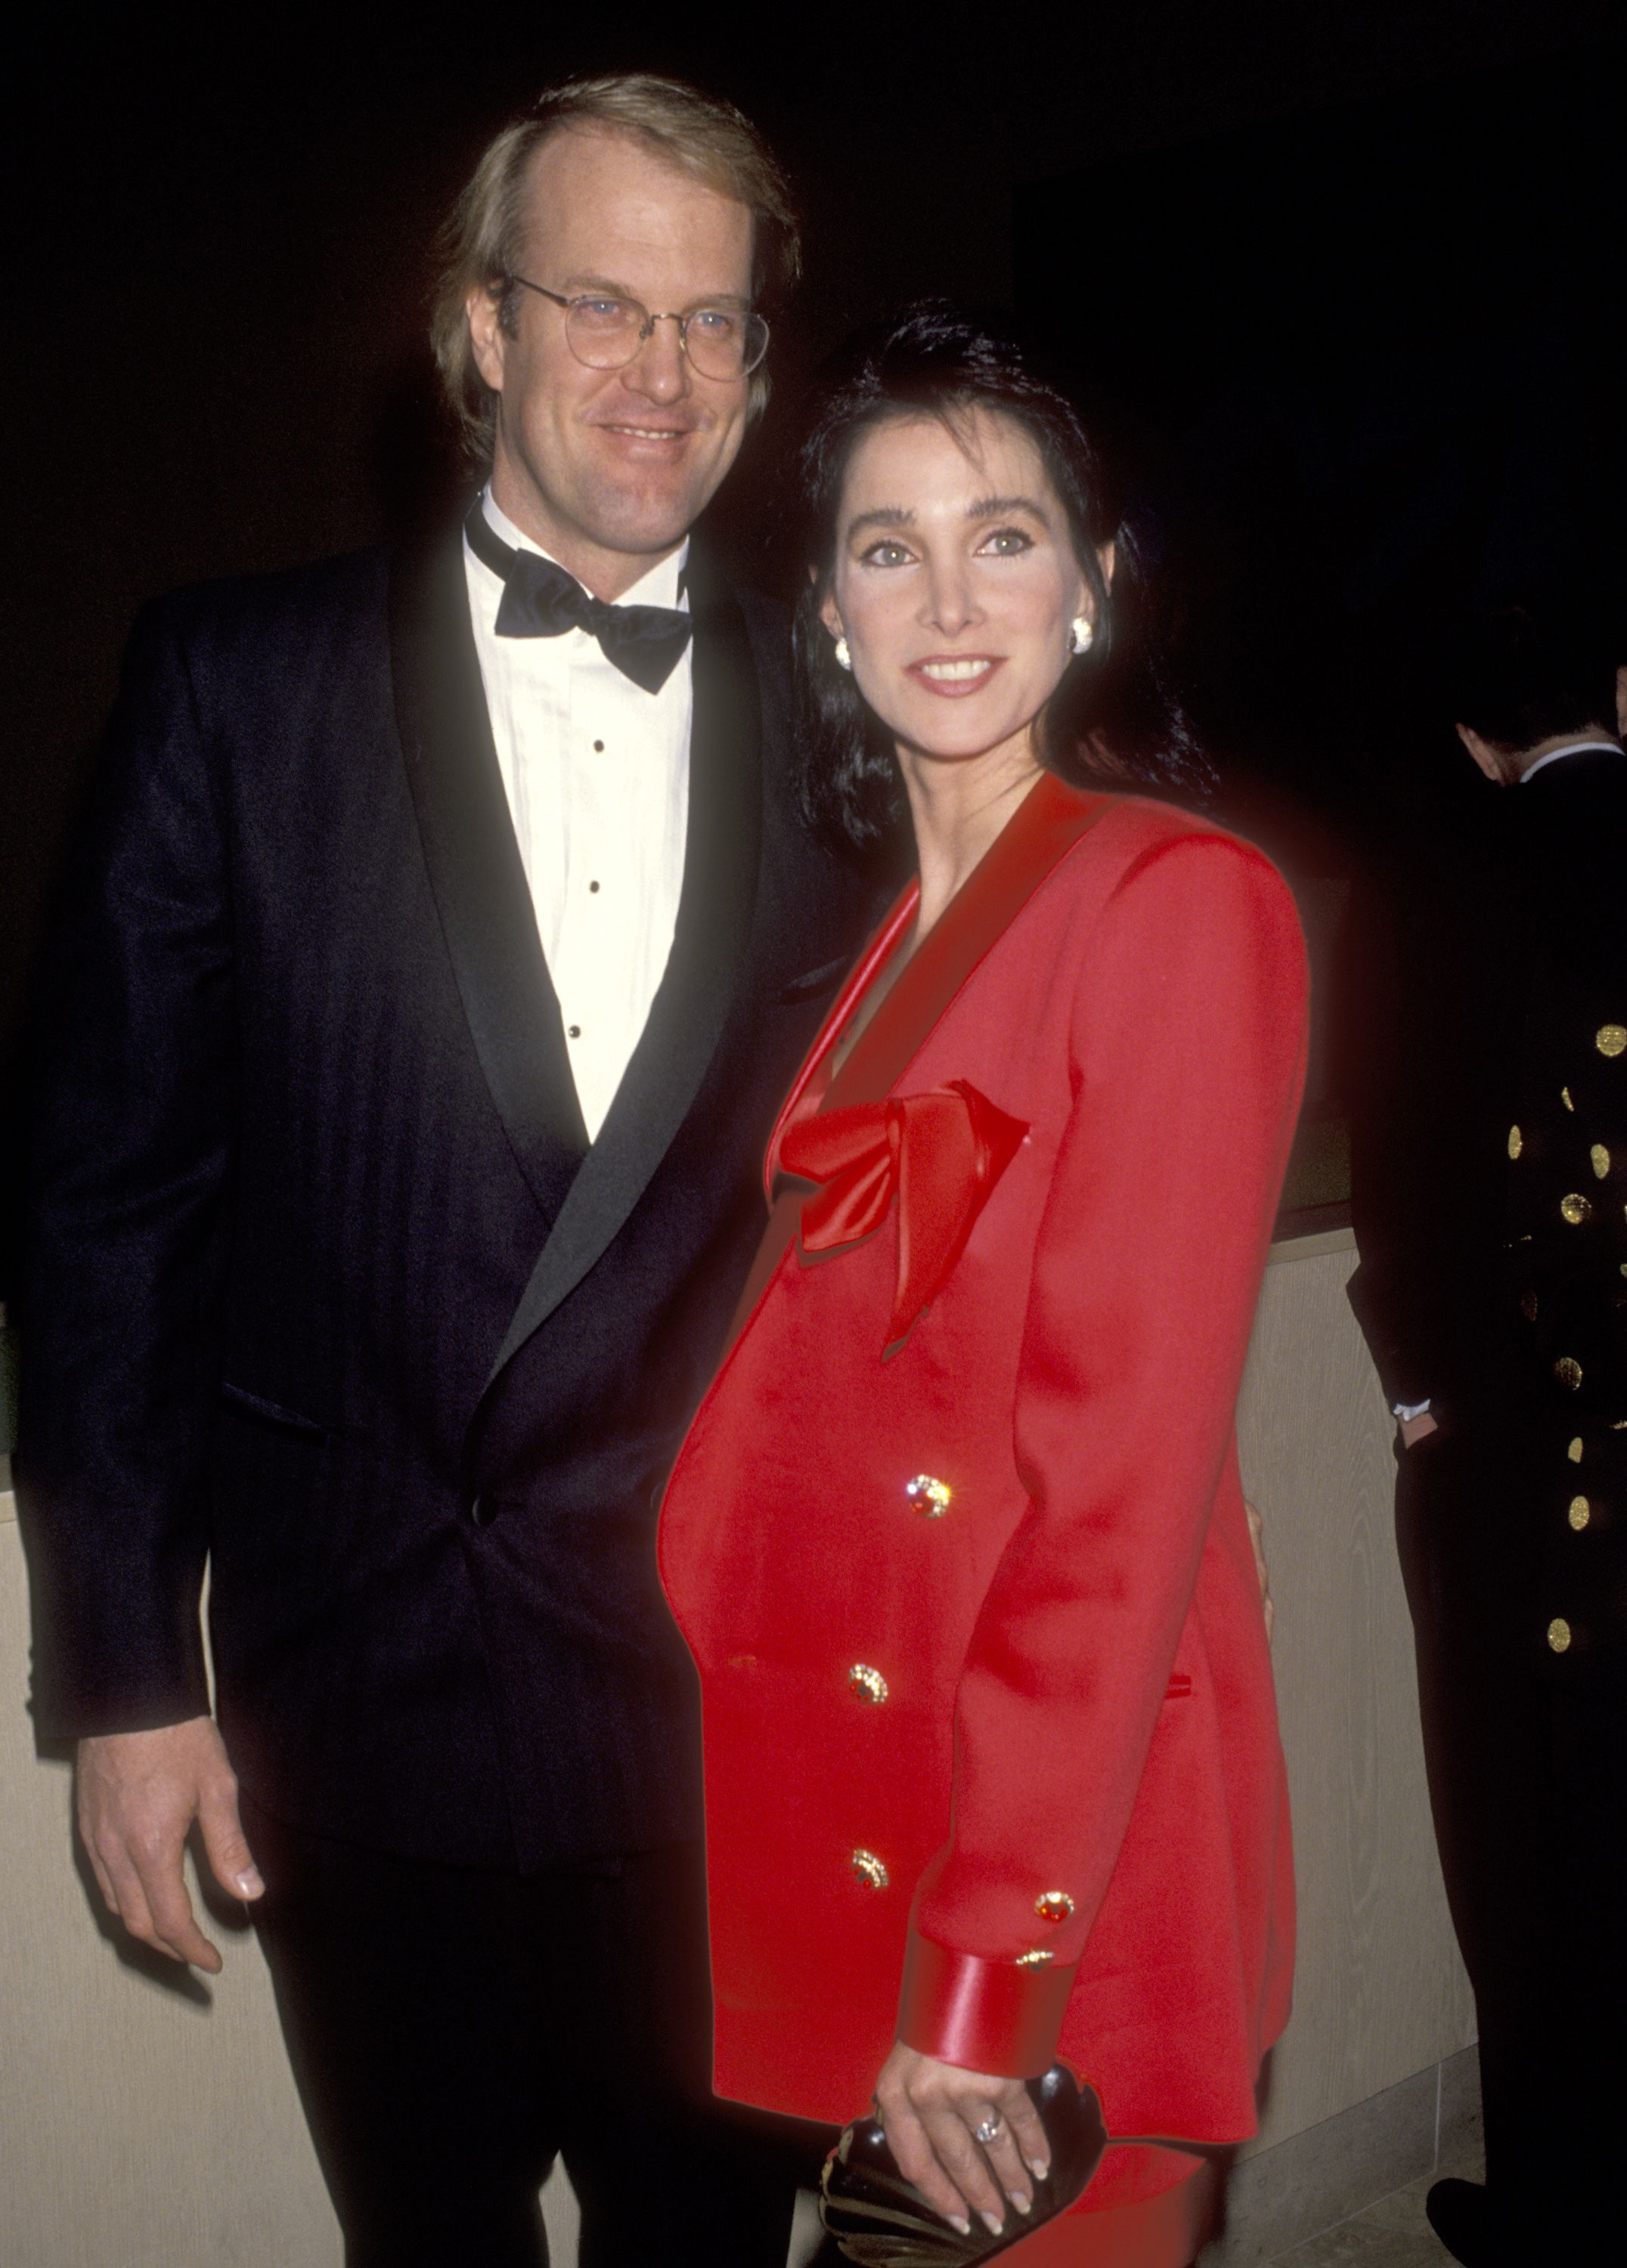 John Tesh and Connie Sellecca attend the American Friends of The Hebrew University's Scopus Award on January 30, 1993 in Beverly Hills, California | Photo: Getty Images